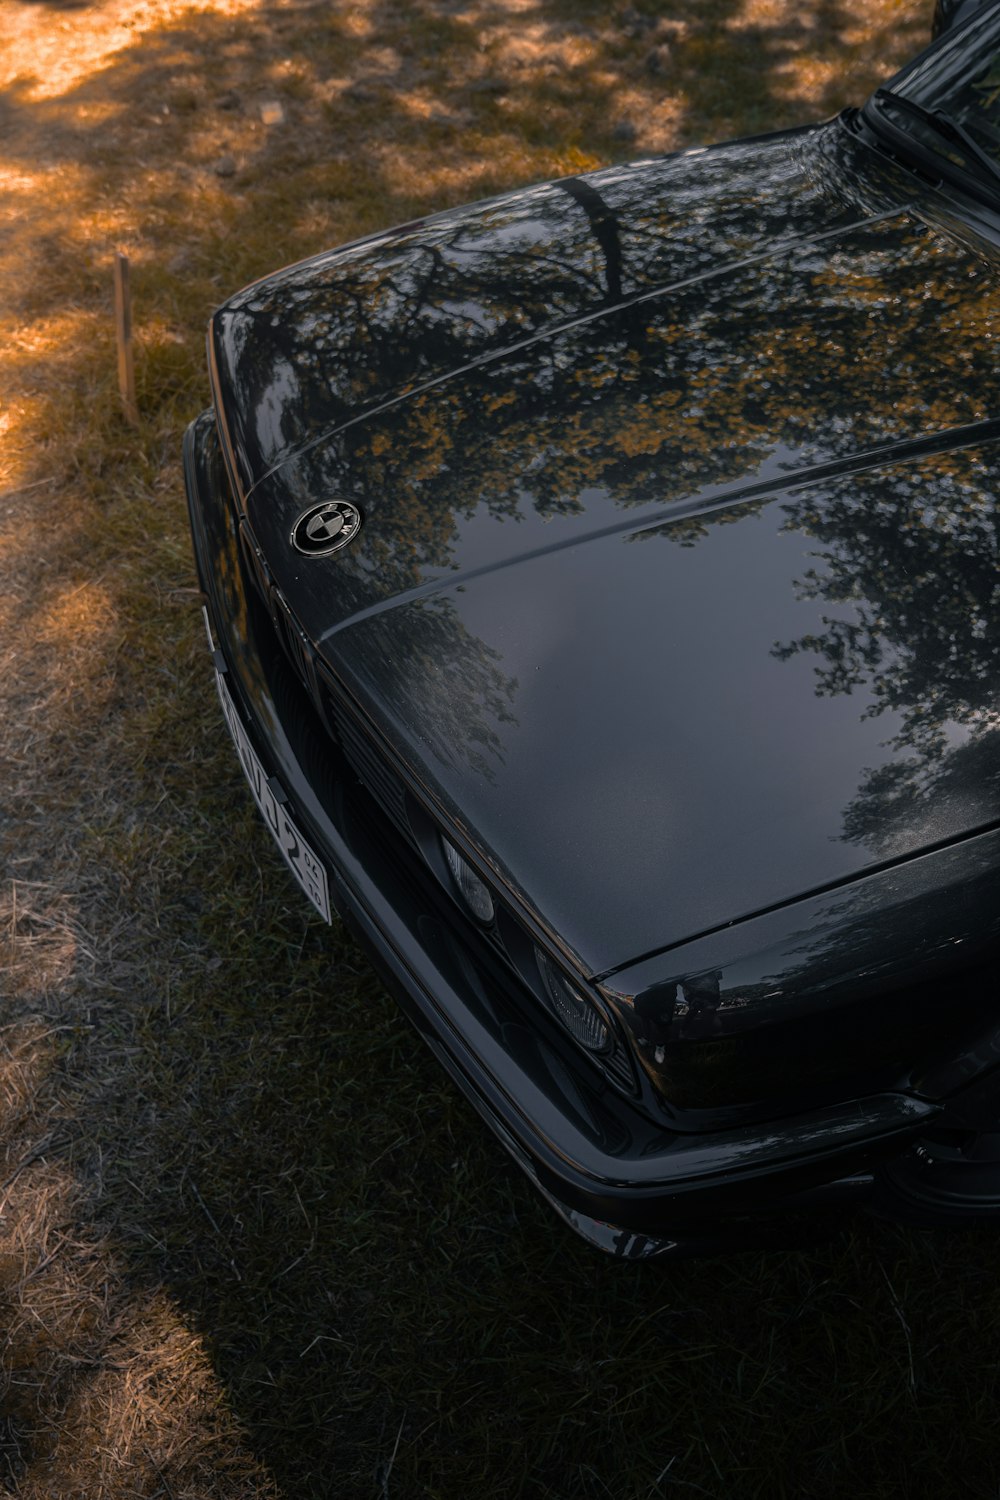 a black car parked in the grass near a tree